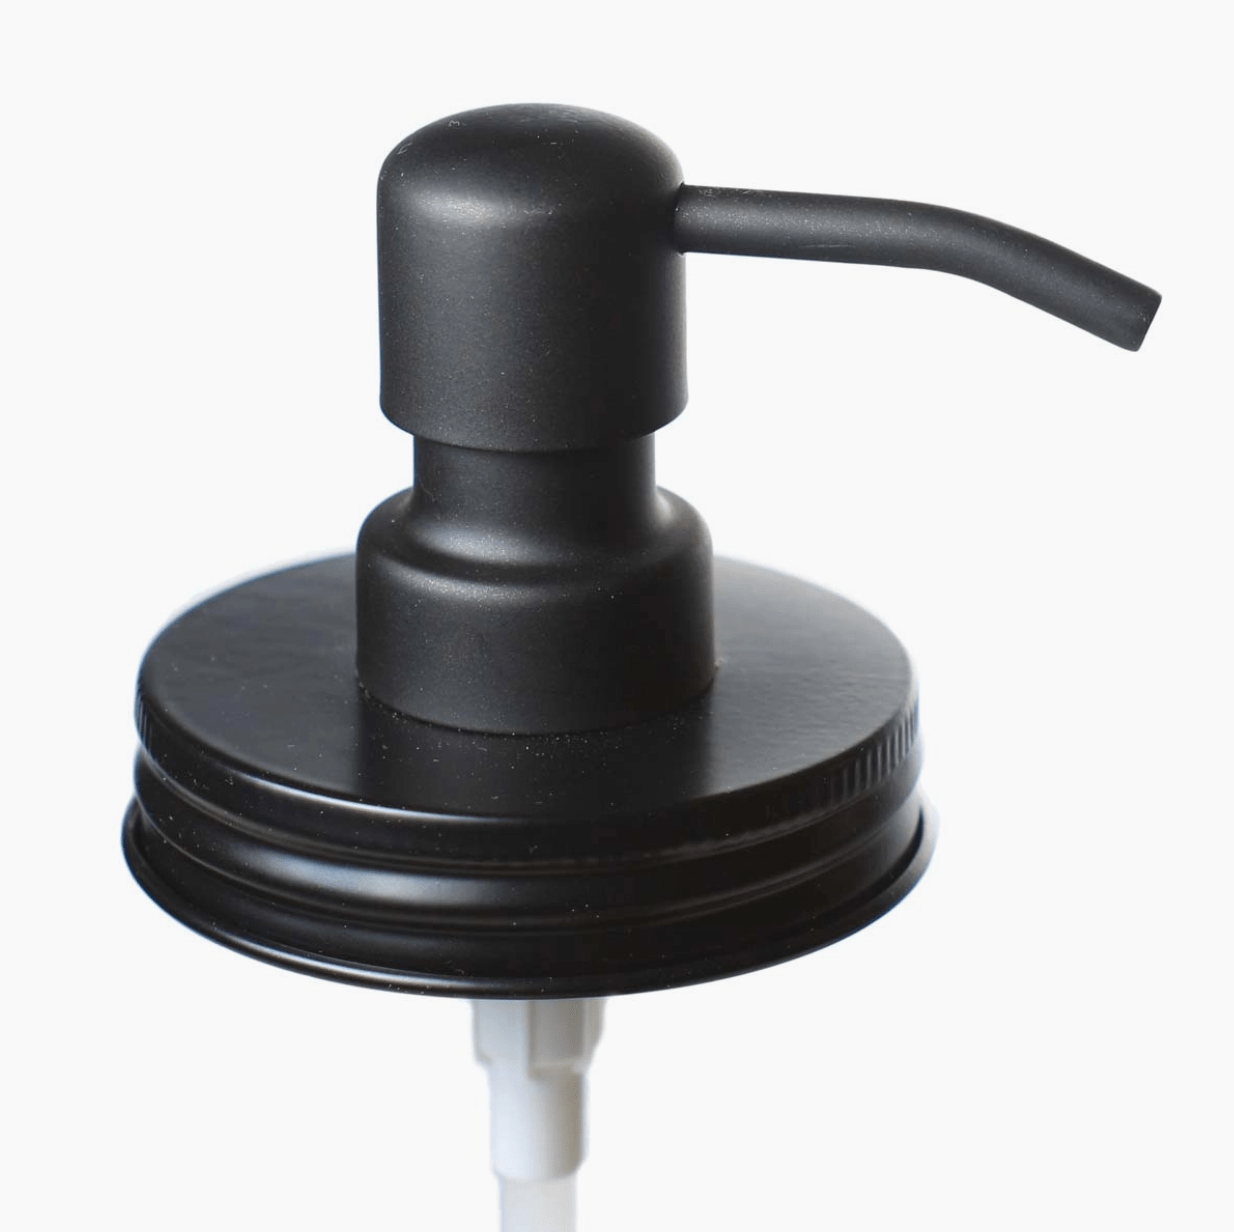 Photo of a black stainless steel regular mouth soap pump lid